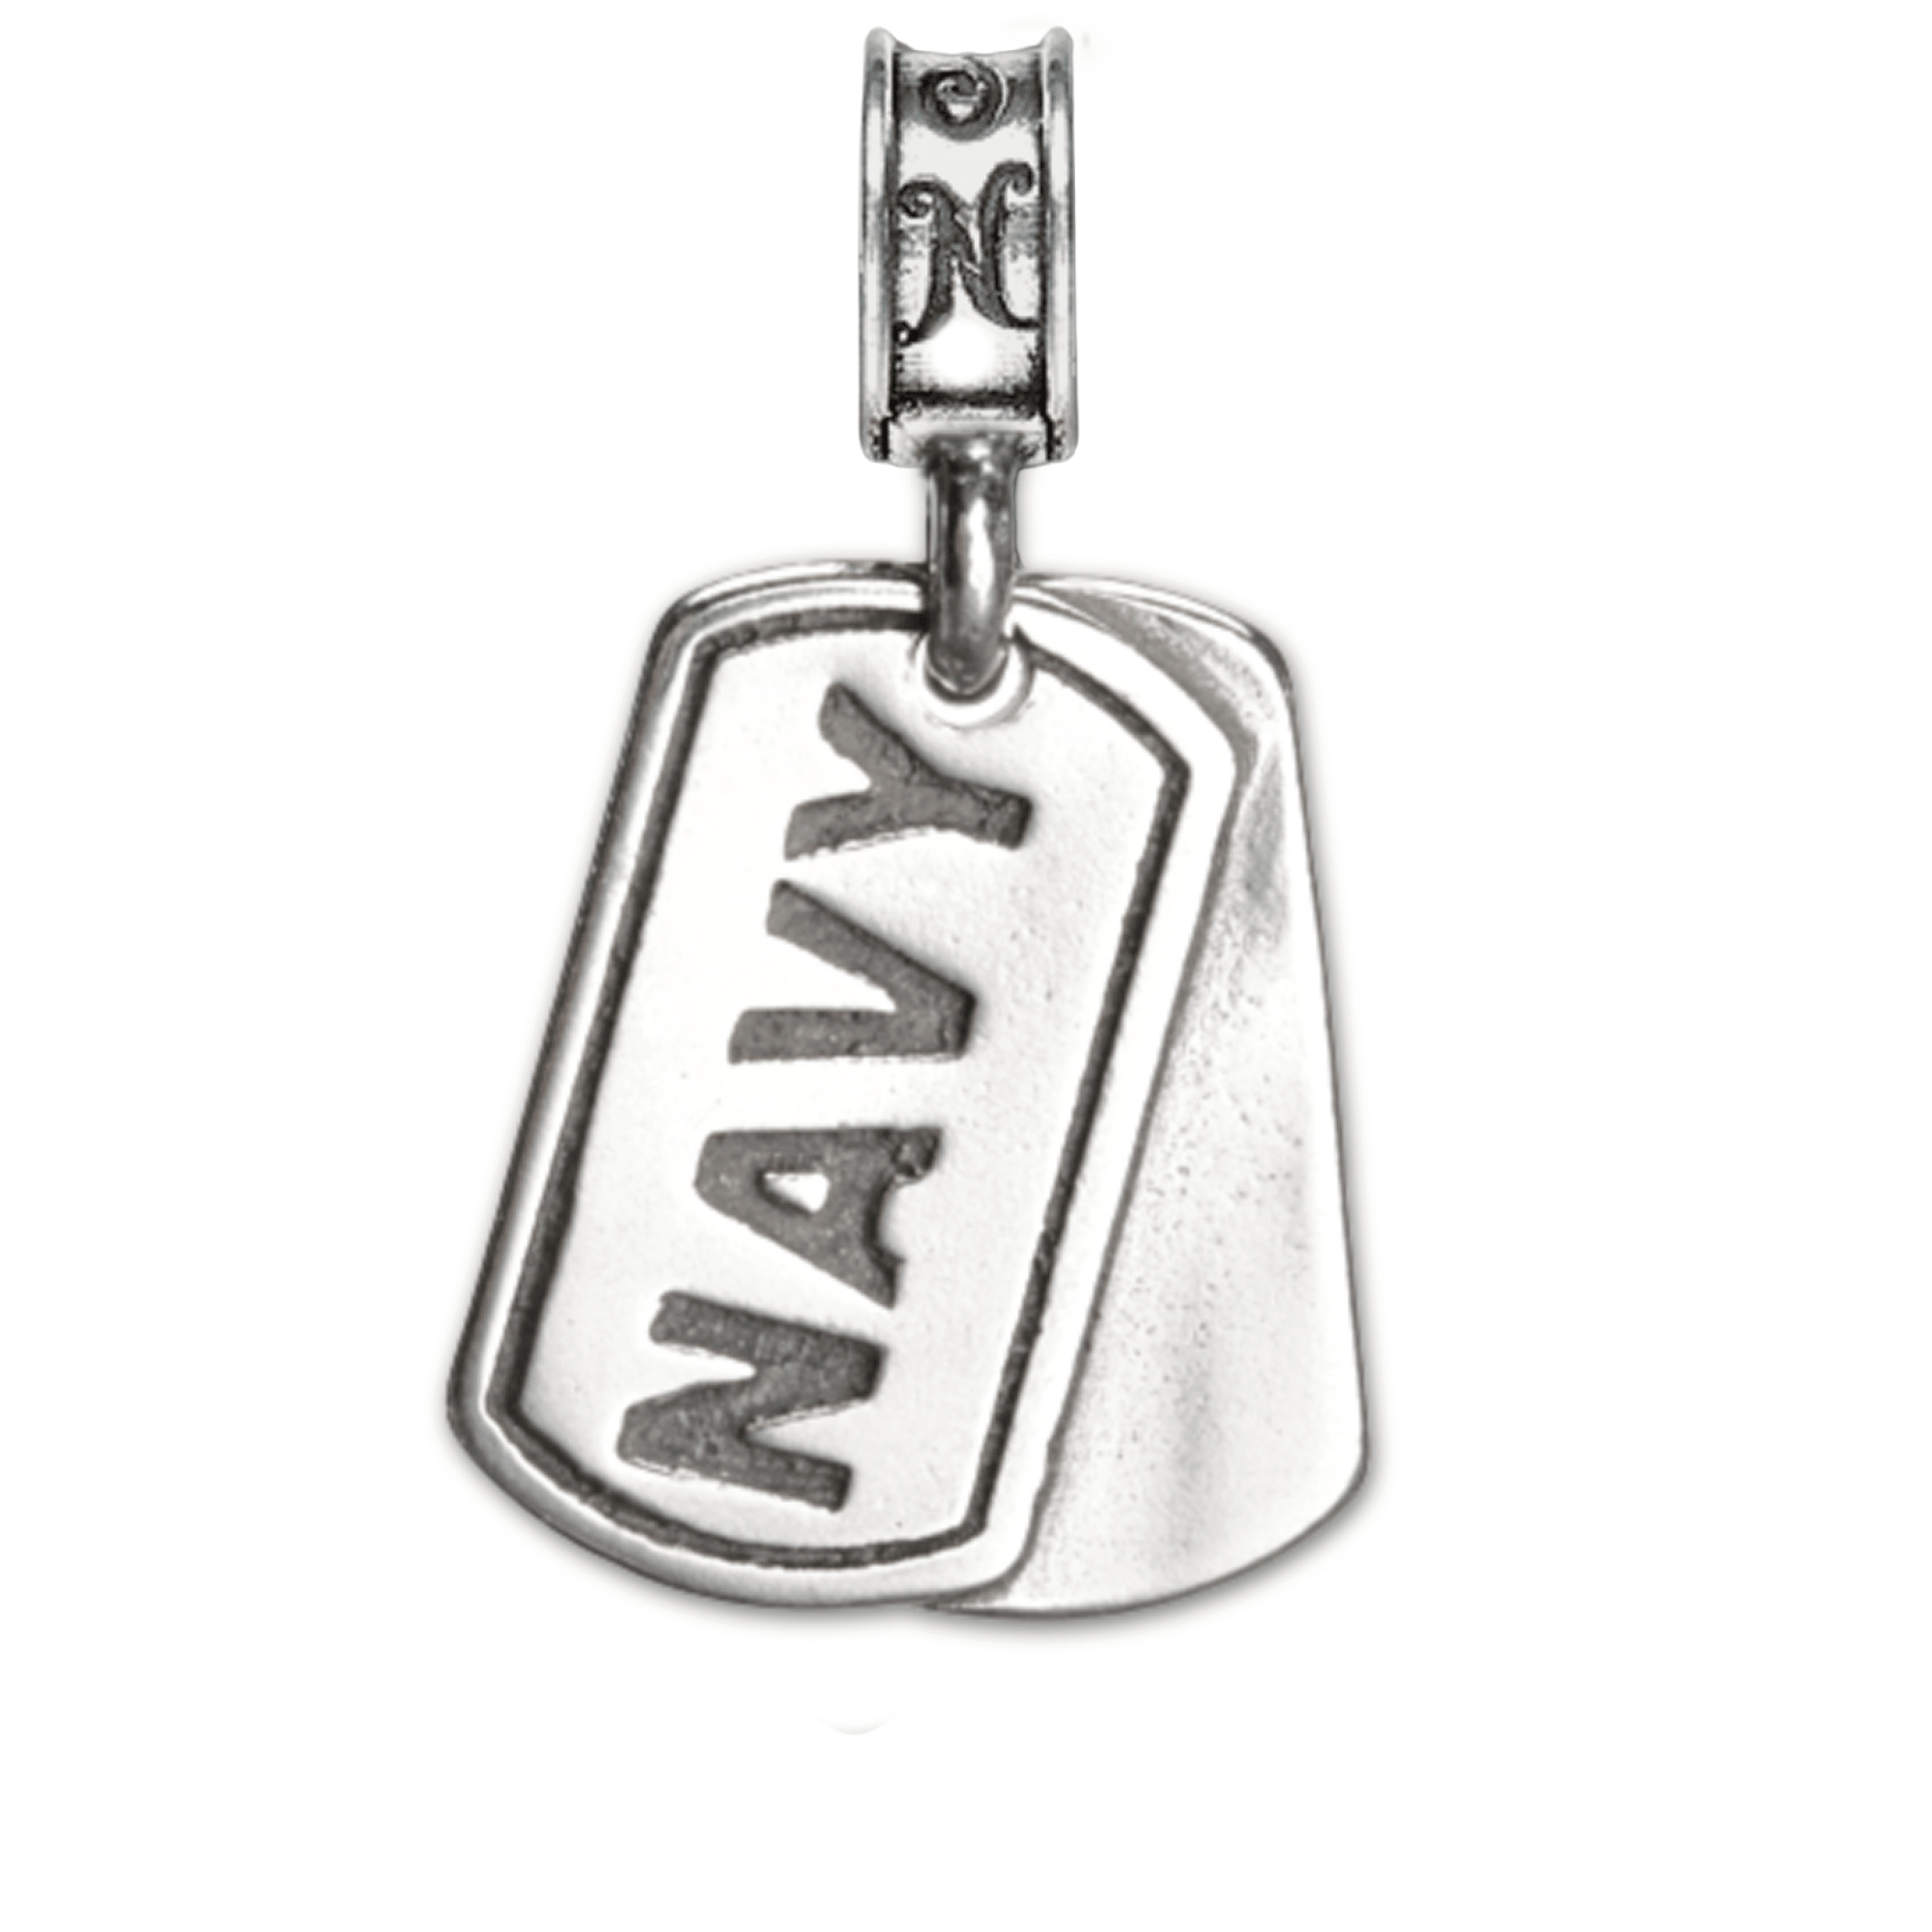 Military Jewelry, Military Charms, Navy, USN, Military Gifts, Navy Dog Tag Pendant